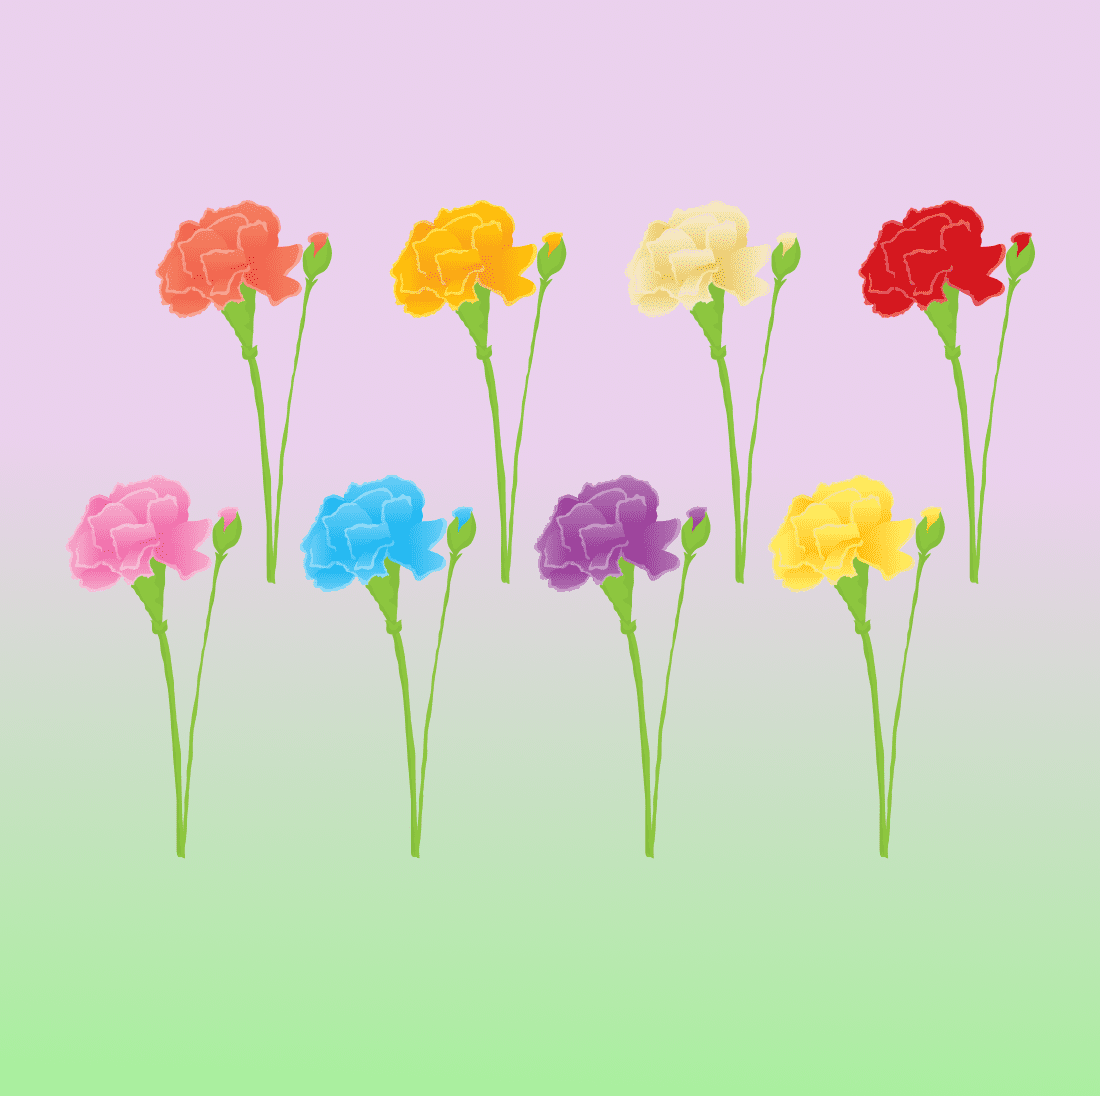 Colorful SVG carnations on a pastel background.